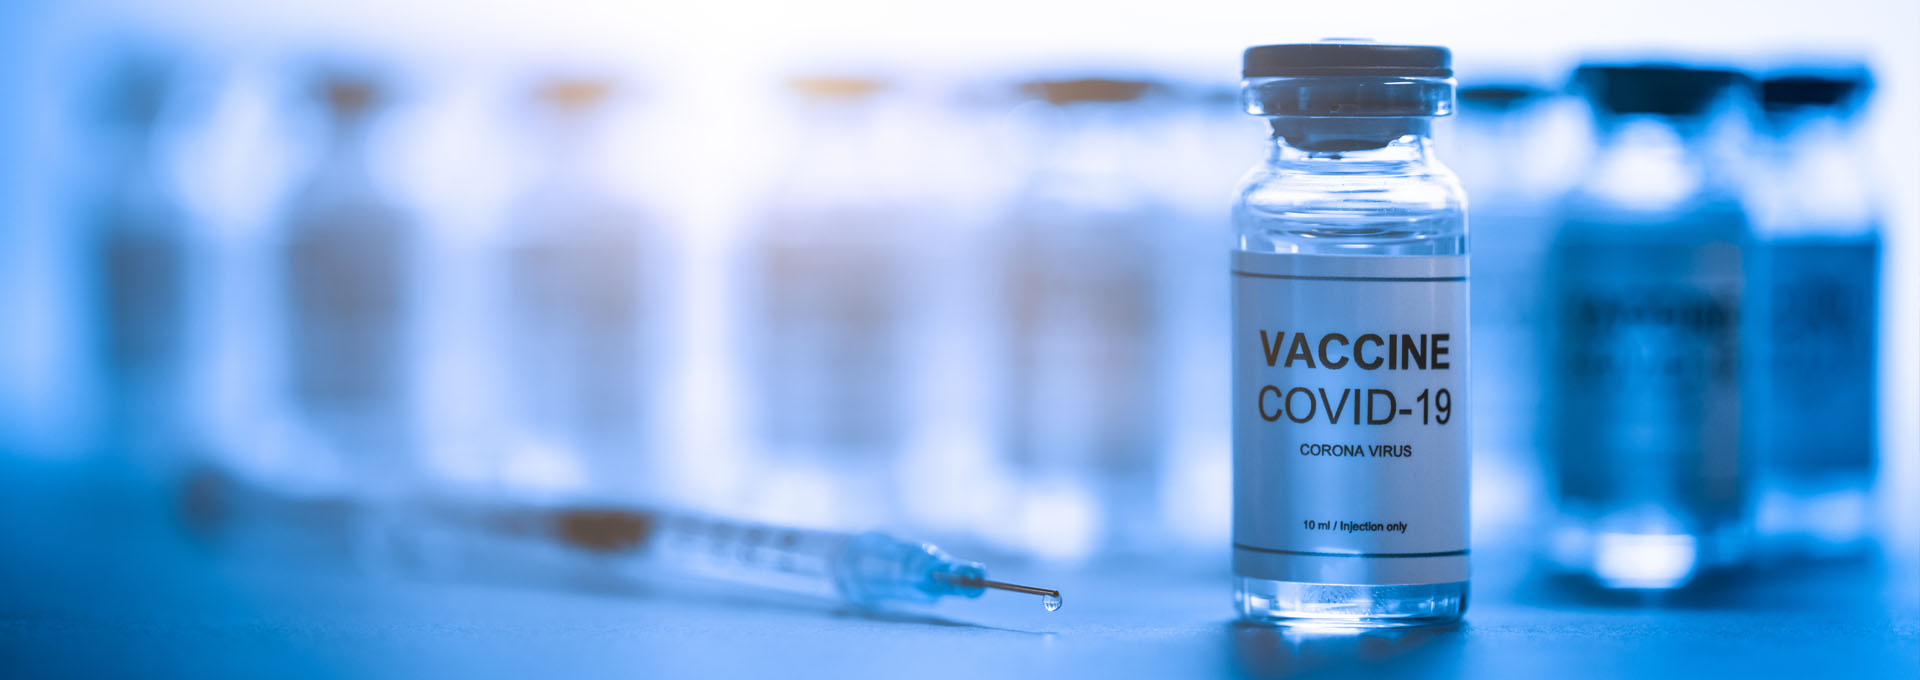 Guest Editorial: Covid-19 Vaccine and High Stakes of Quality 